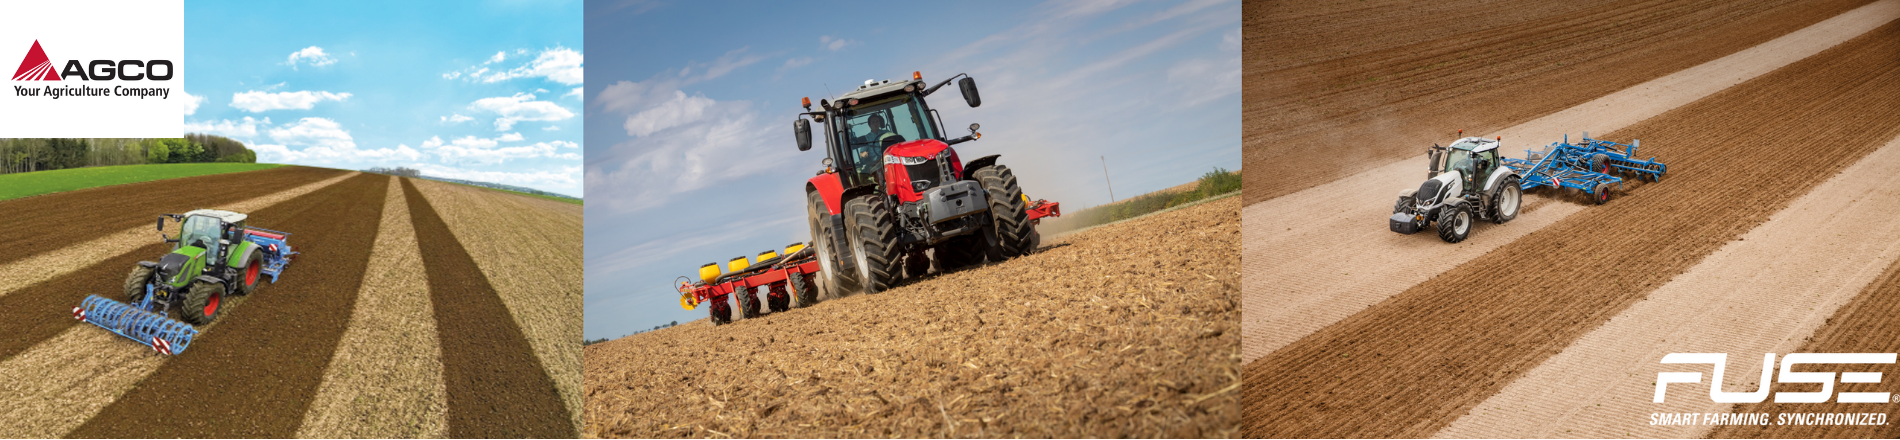 Technical Support Specialist- AGCO Nederland  Hero